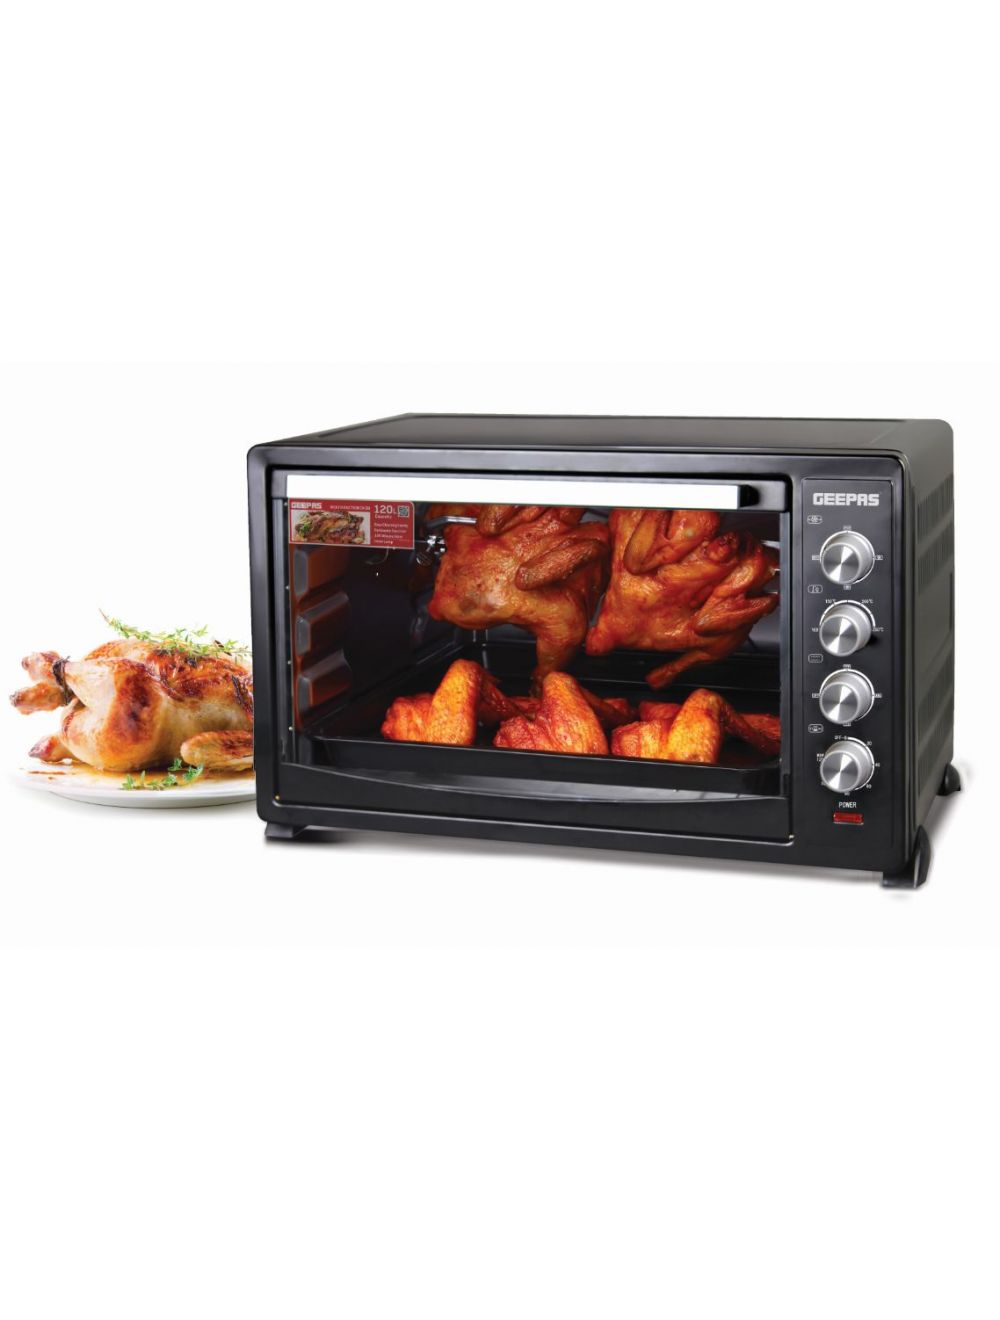 Geepas GO4461 Multi-function Oven, 120L